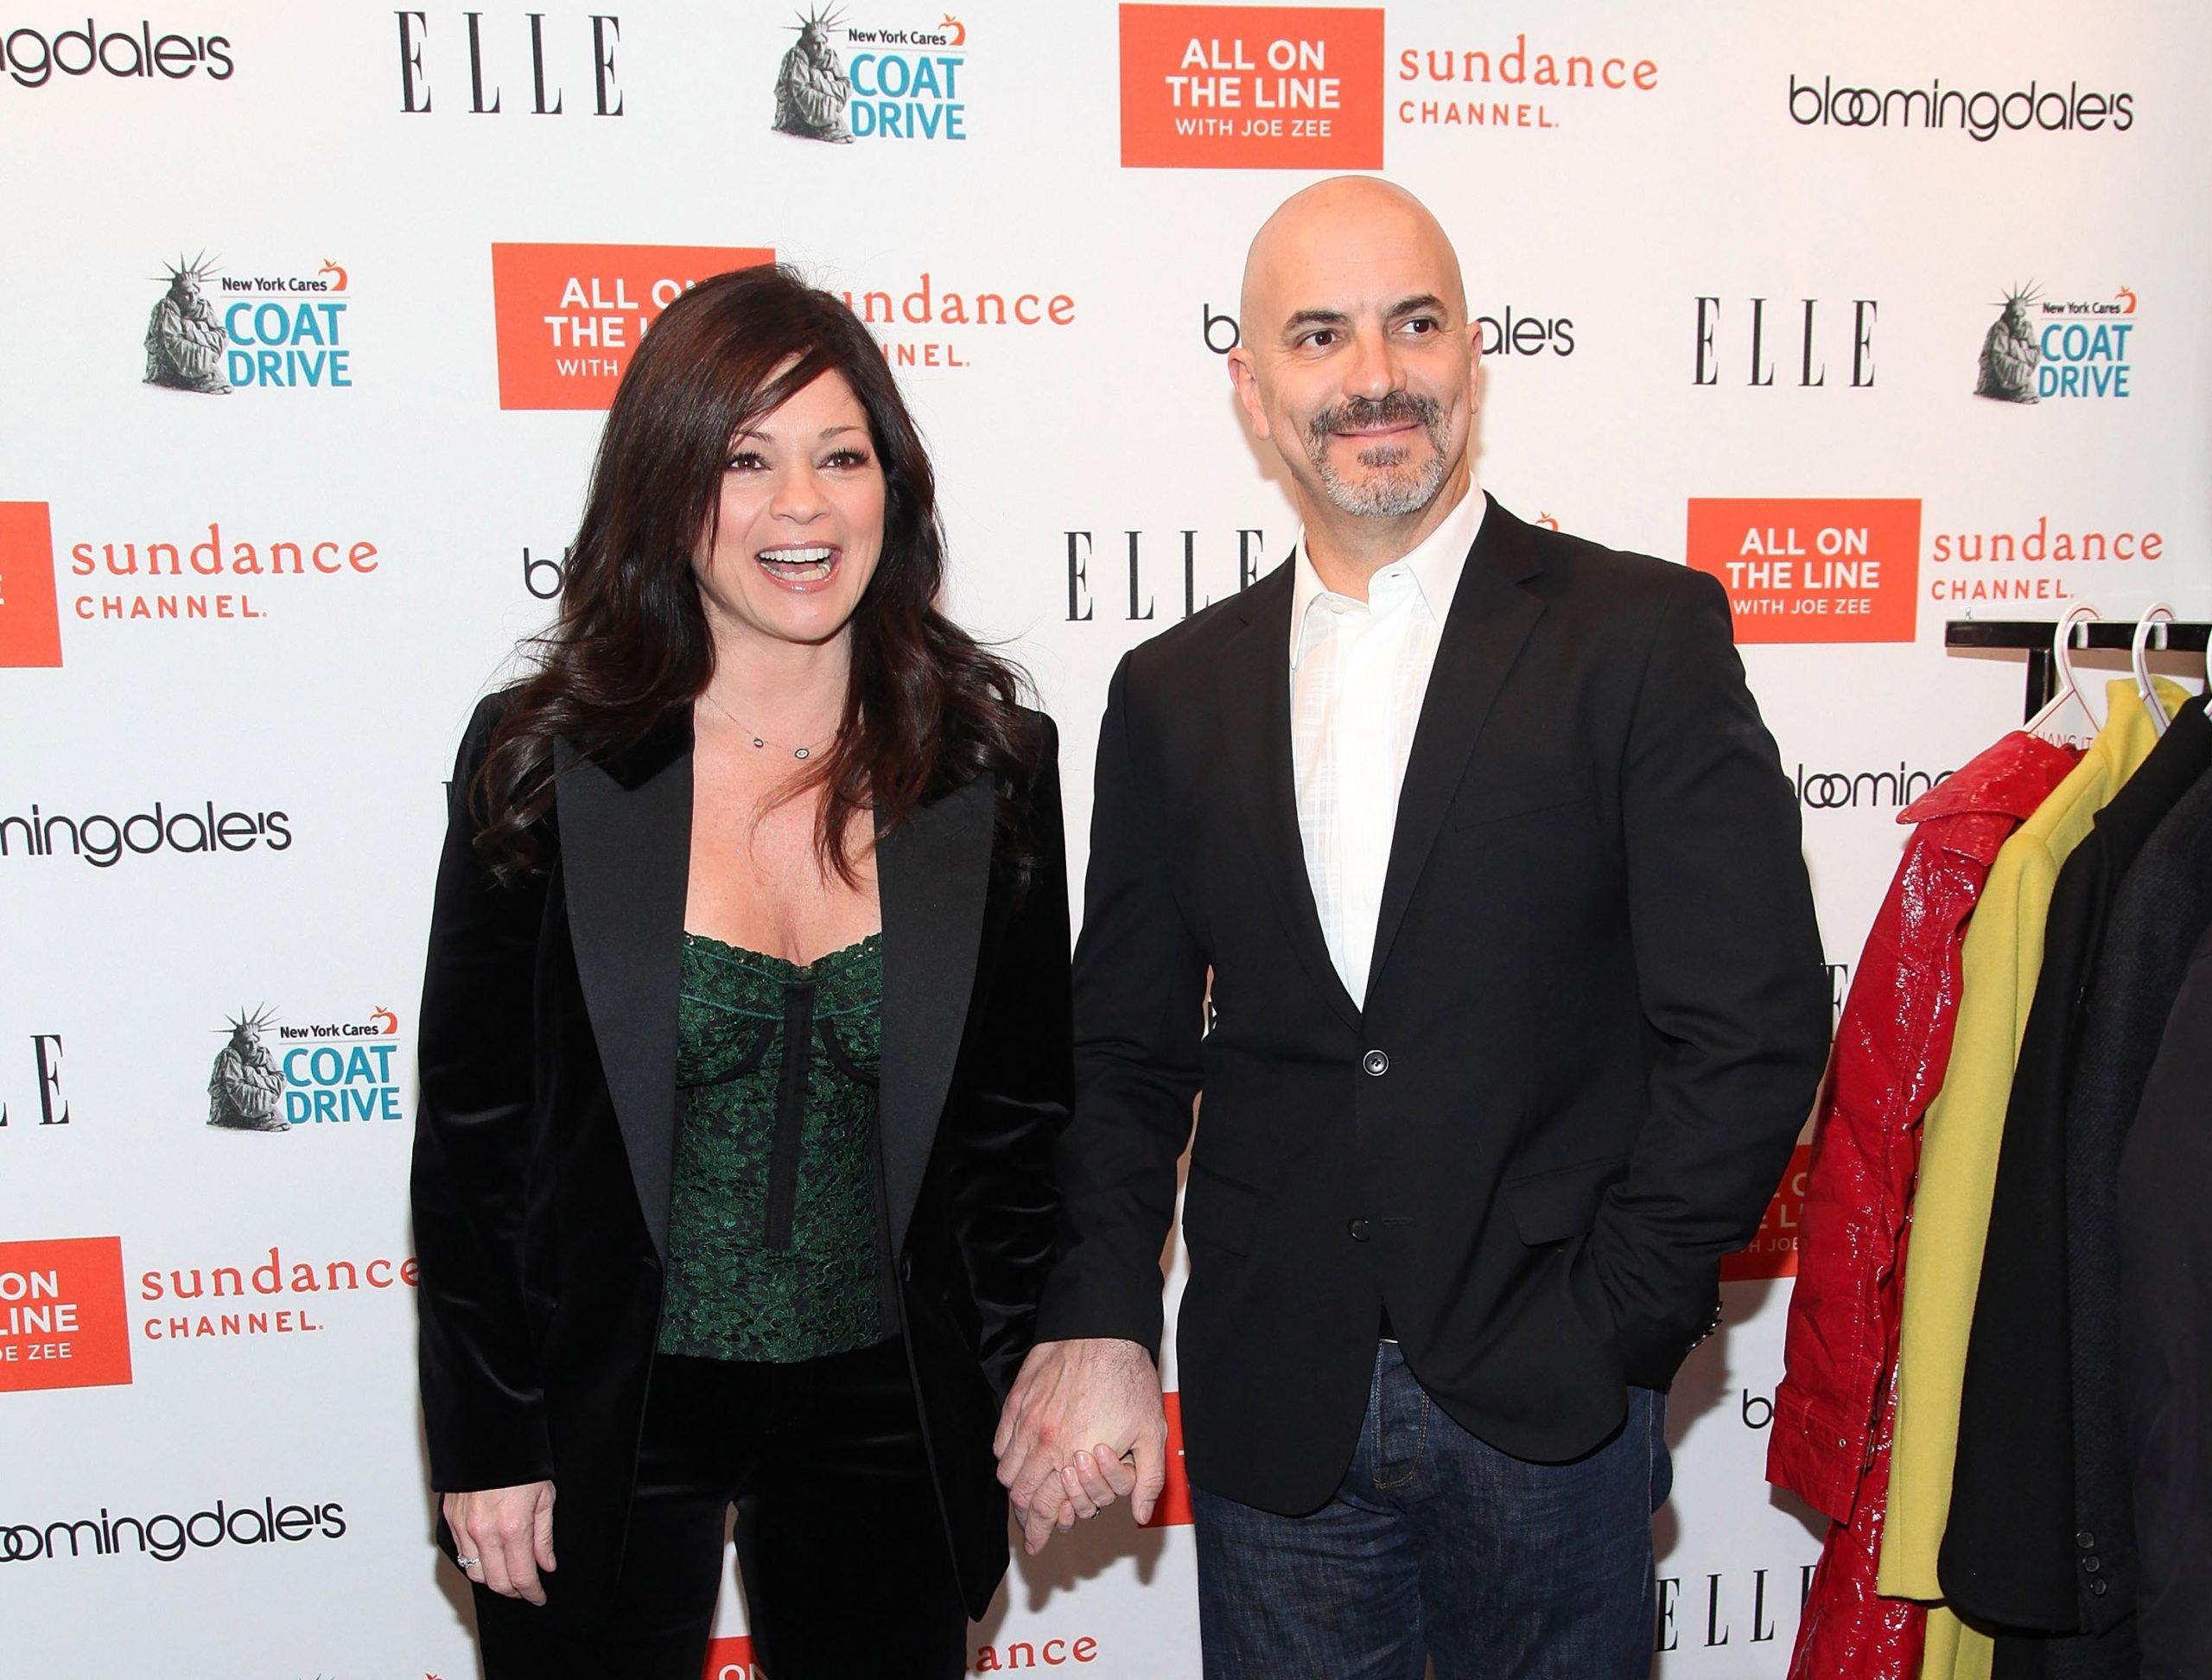 Actor and Food Network host Valerie Bertinelli with her husband Tom Vitale in 2011.